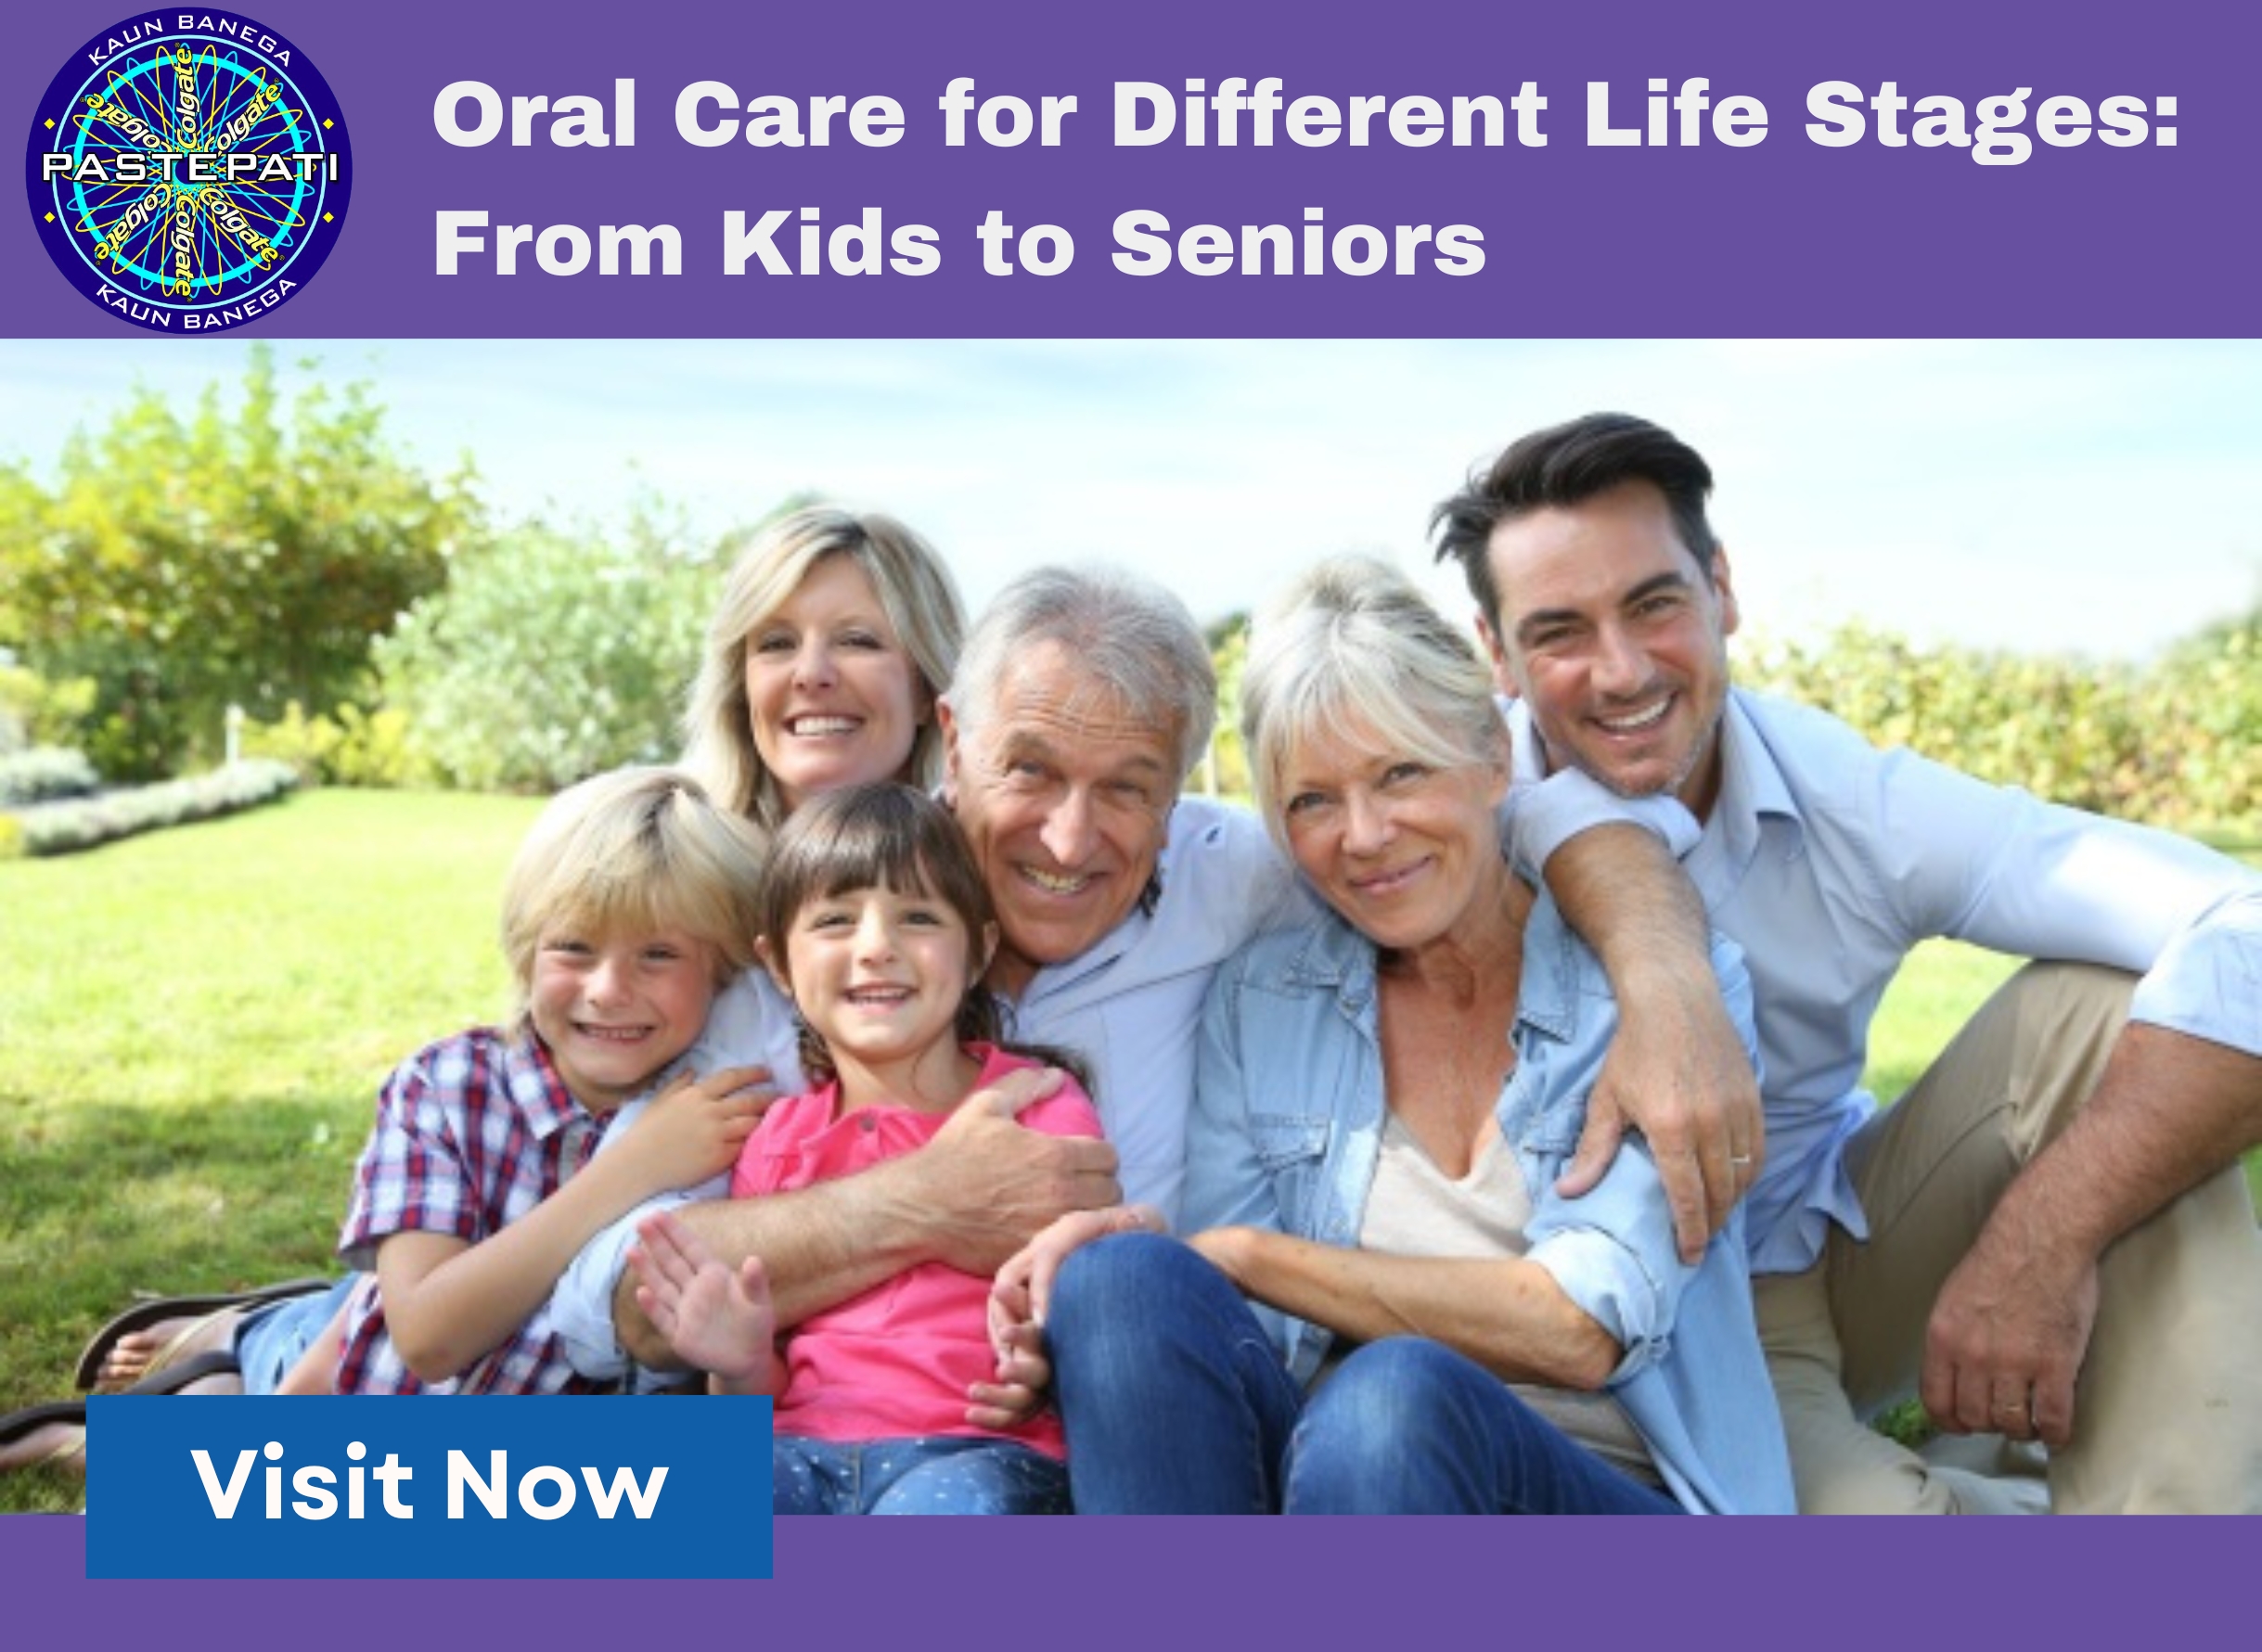 Oral Care for Different Life Stages: From Kids to Seniors